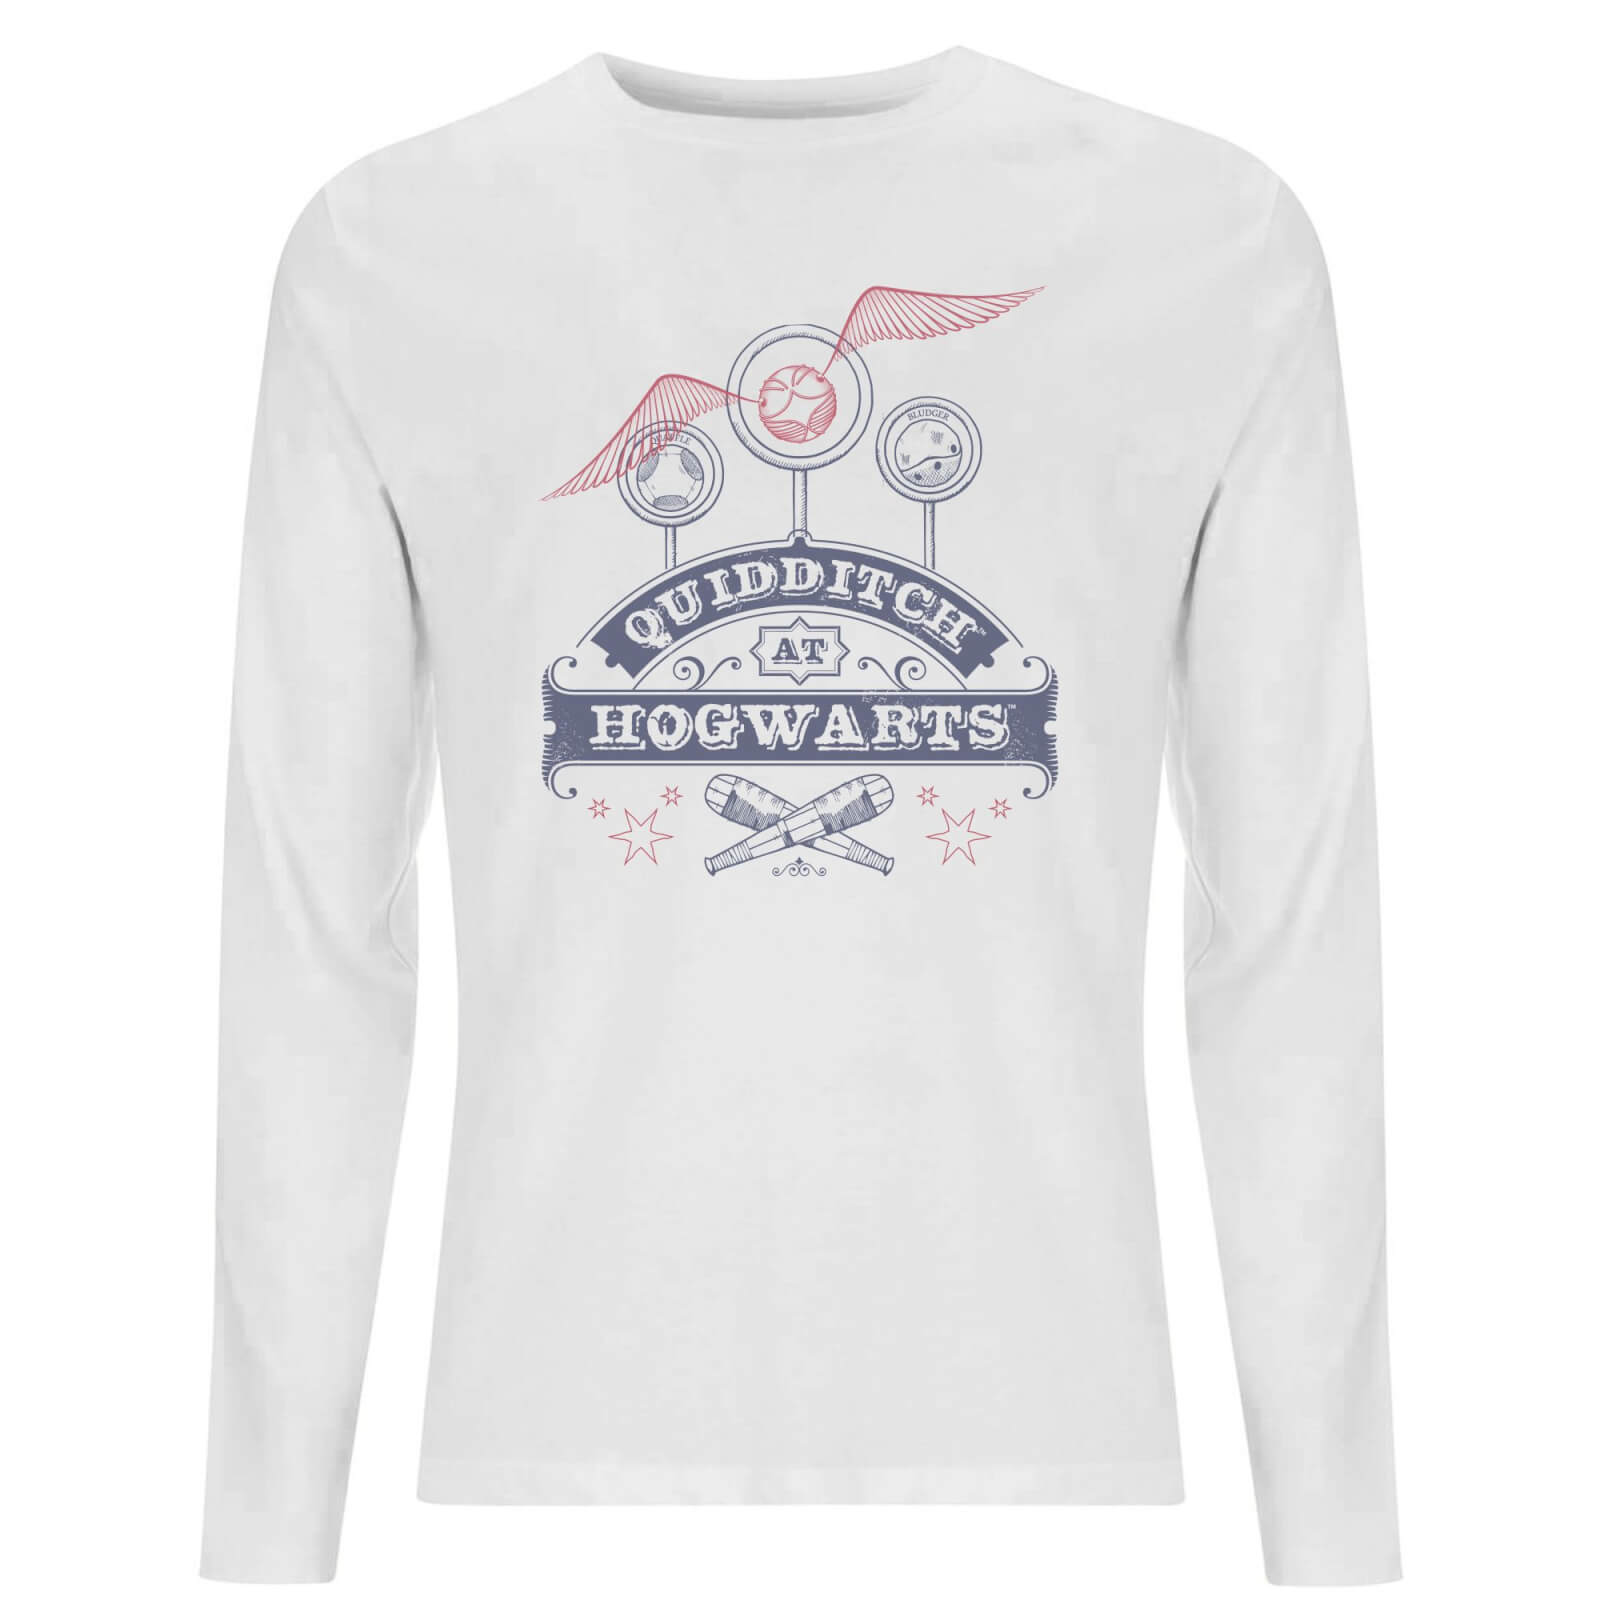 Harry Potter Quidditch At Hogwarts Men's Long Sleeve T-Shirt - White - Xs - Wit